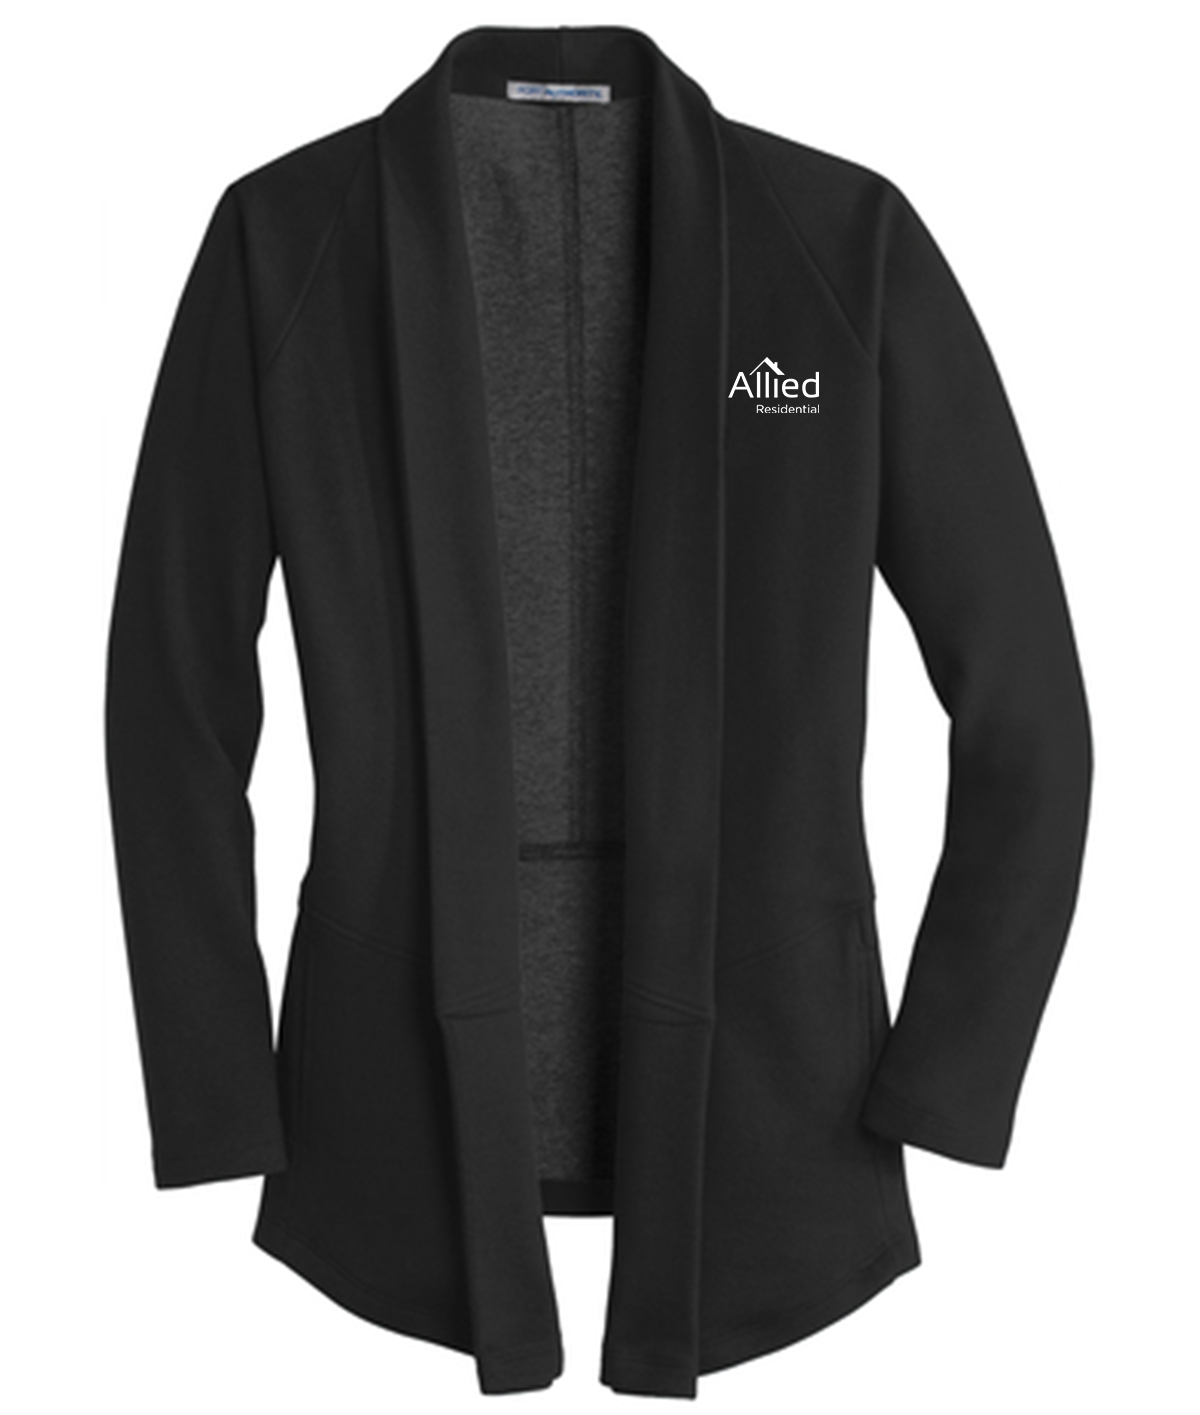 Port Authority Ladies Cardigan Deep Black/ Charcoal Heather [Allied Residential]